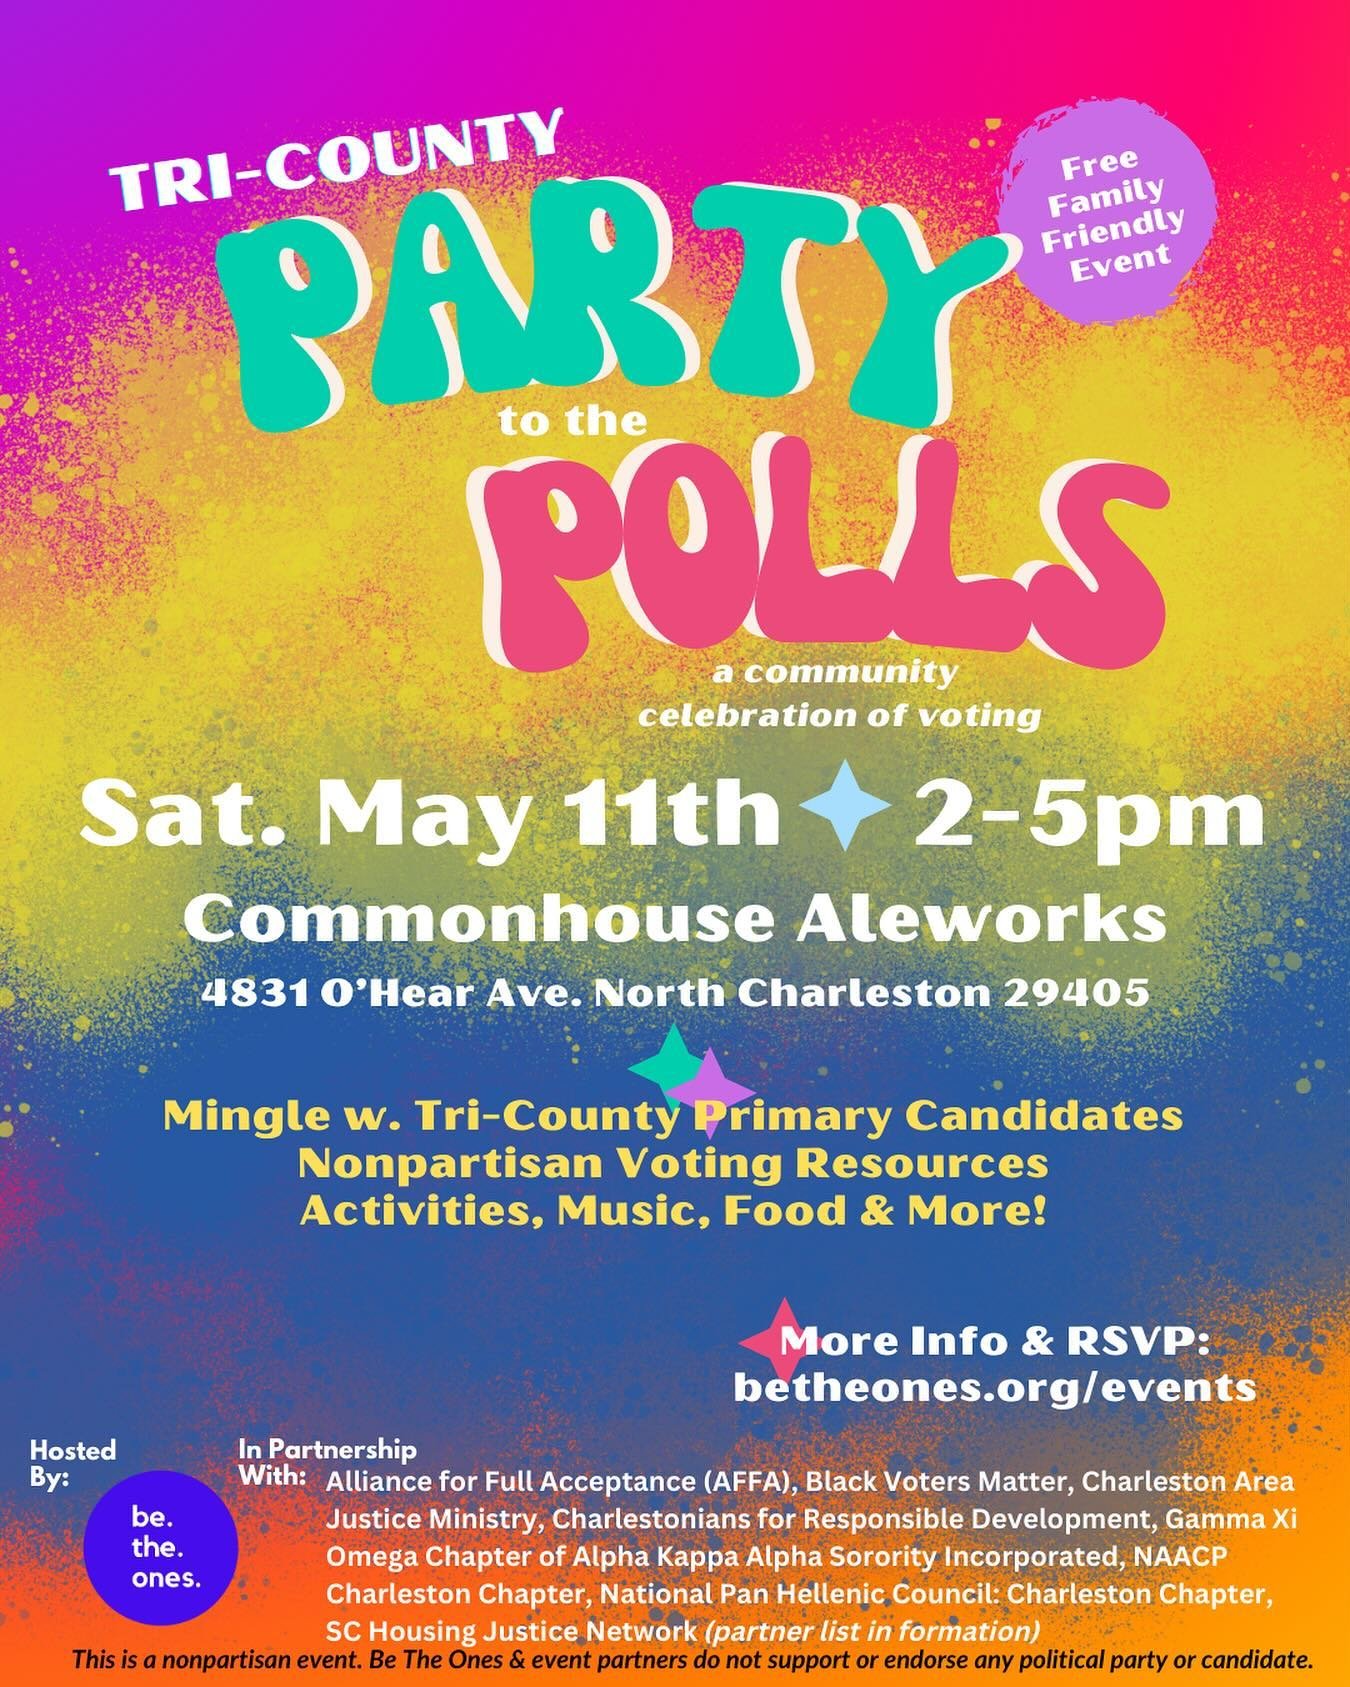 It&rsquo;s Party to the (Primary) Polls Season, y&rsquo;all! 🥳

🎉 Pumped to be teaming up with our friends at Commonhouse Aleworks and coalition of incredible partners on Saturday, 5/11 for this event ahead of our really important statewide primari